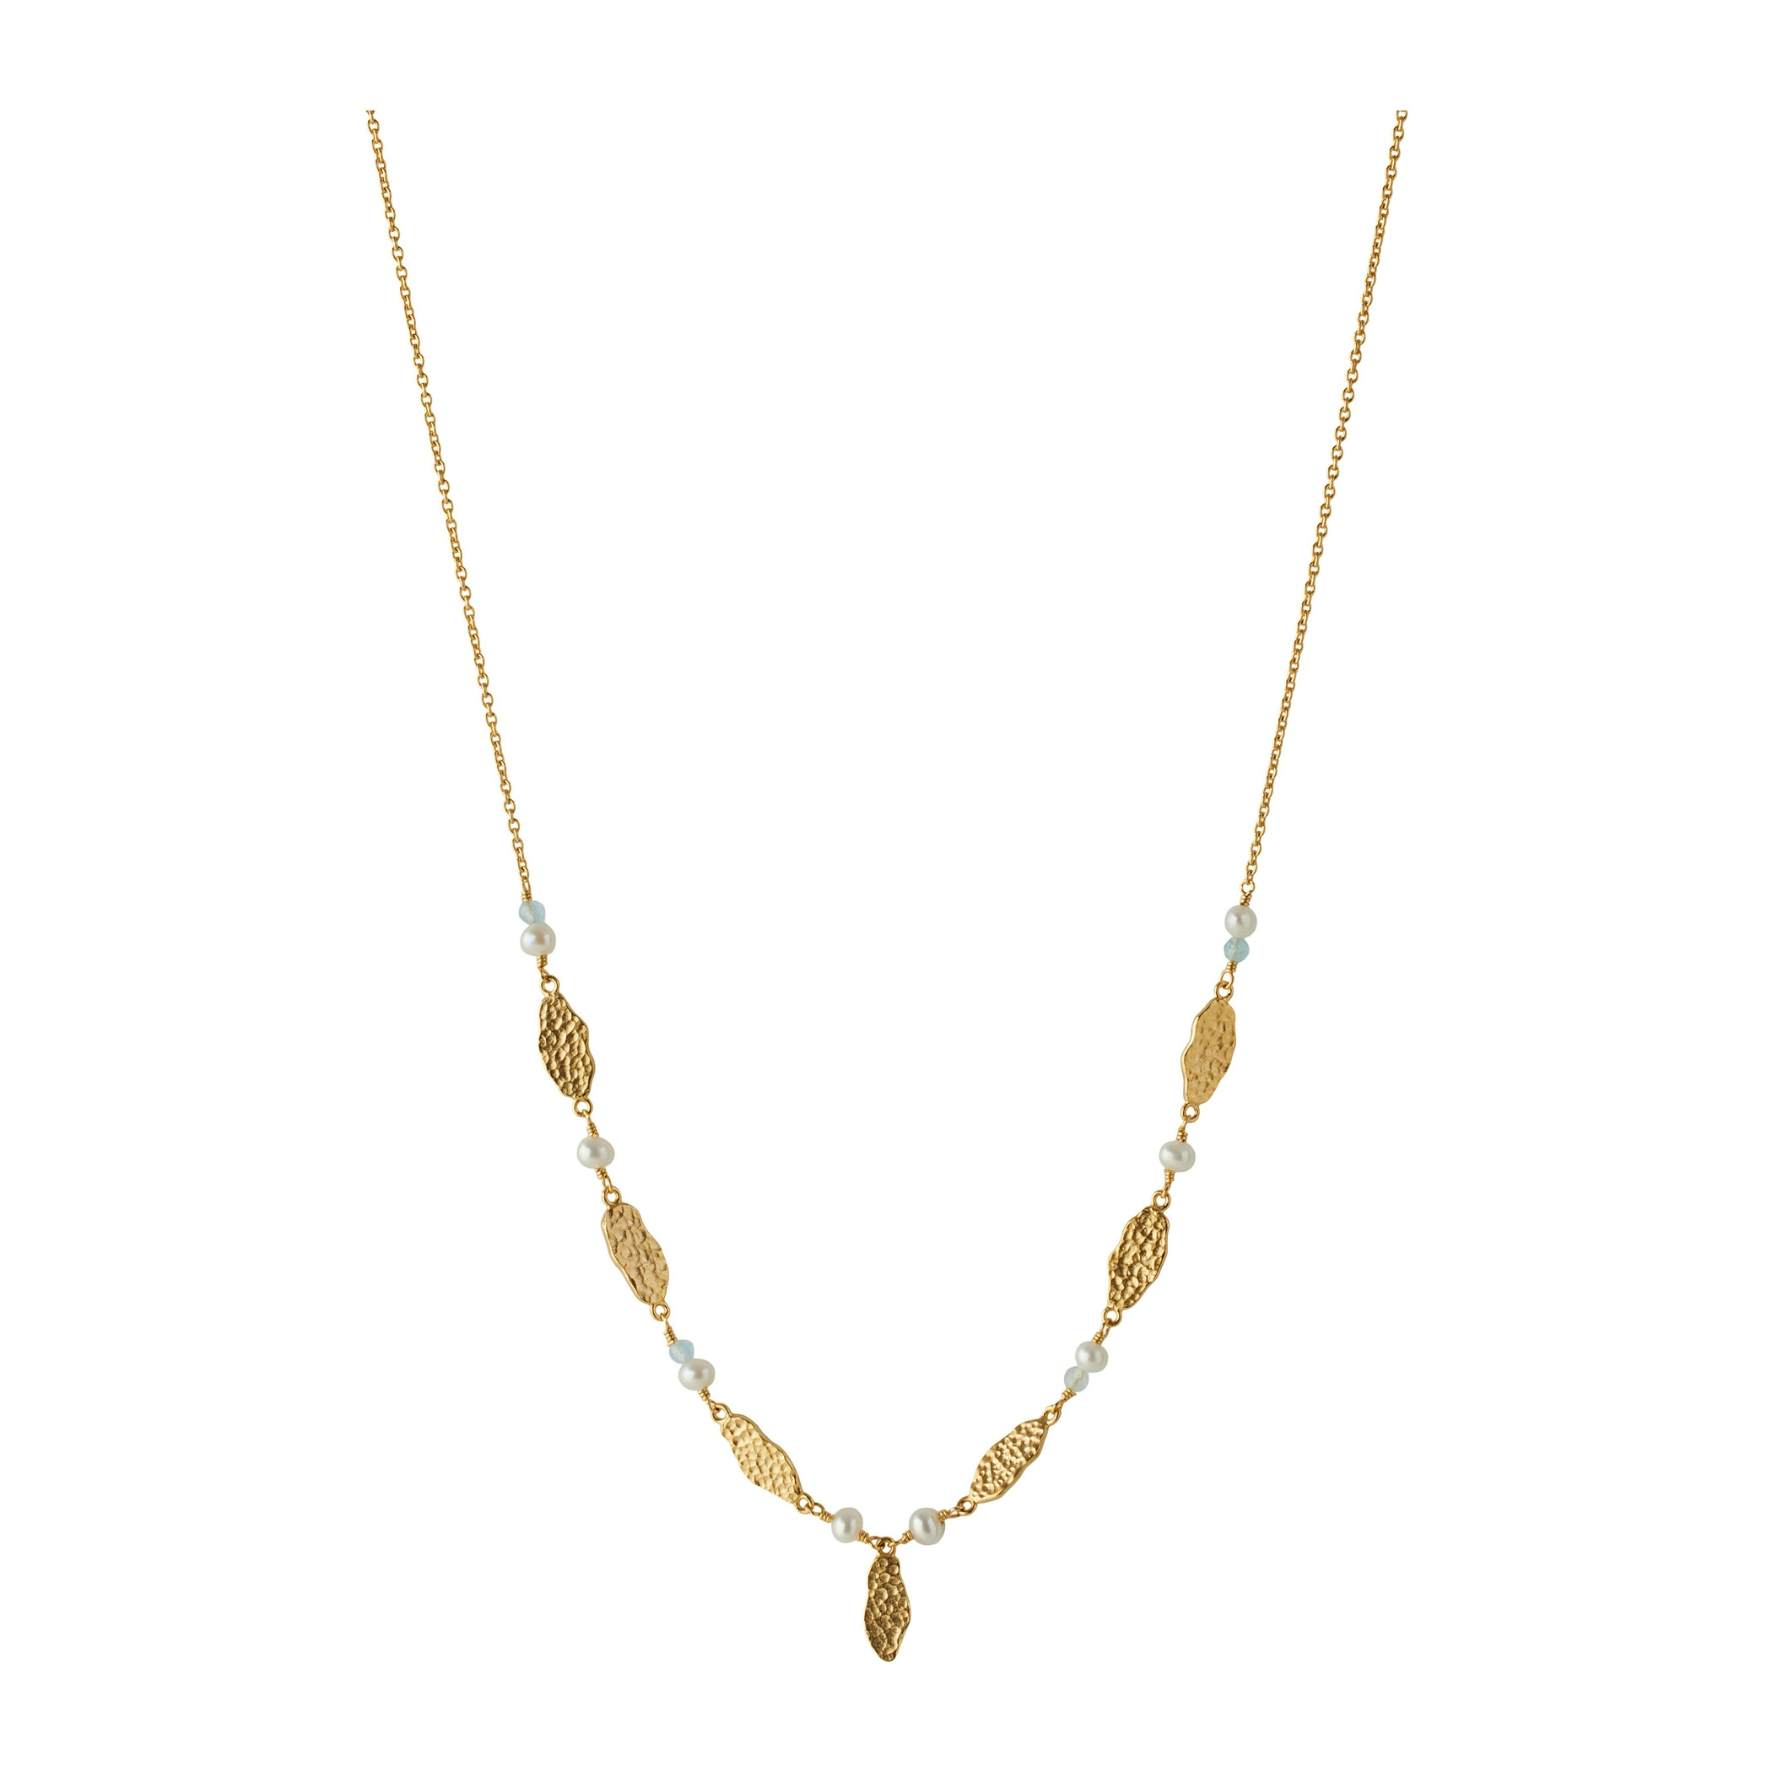 Drifting Dream Necklace from Pernille Corydon in Goldplated-Silver Sterling 925